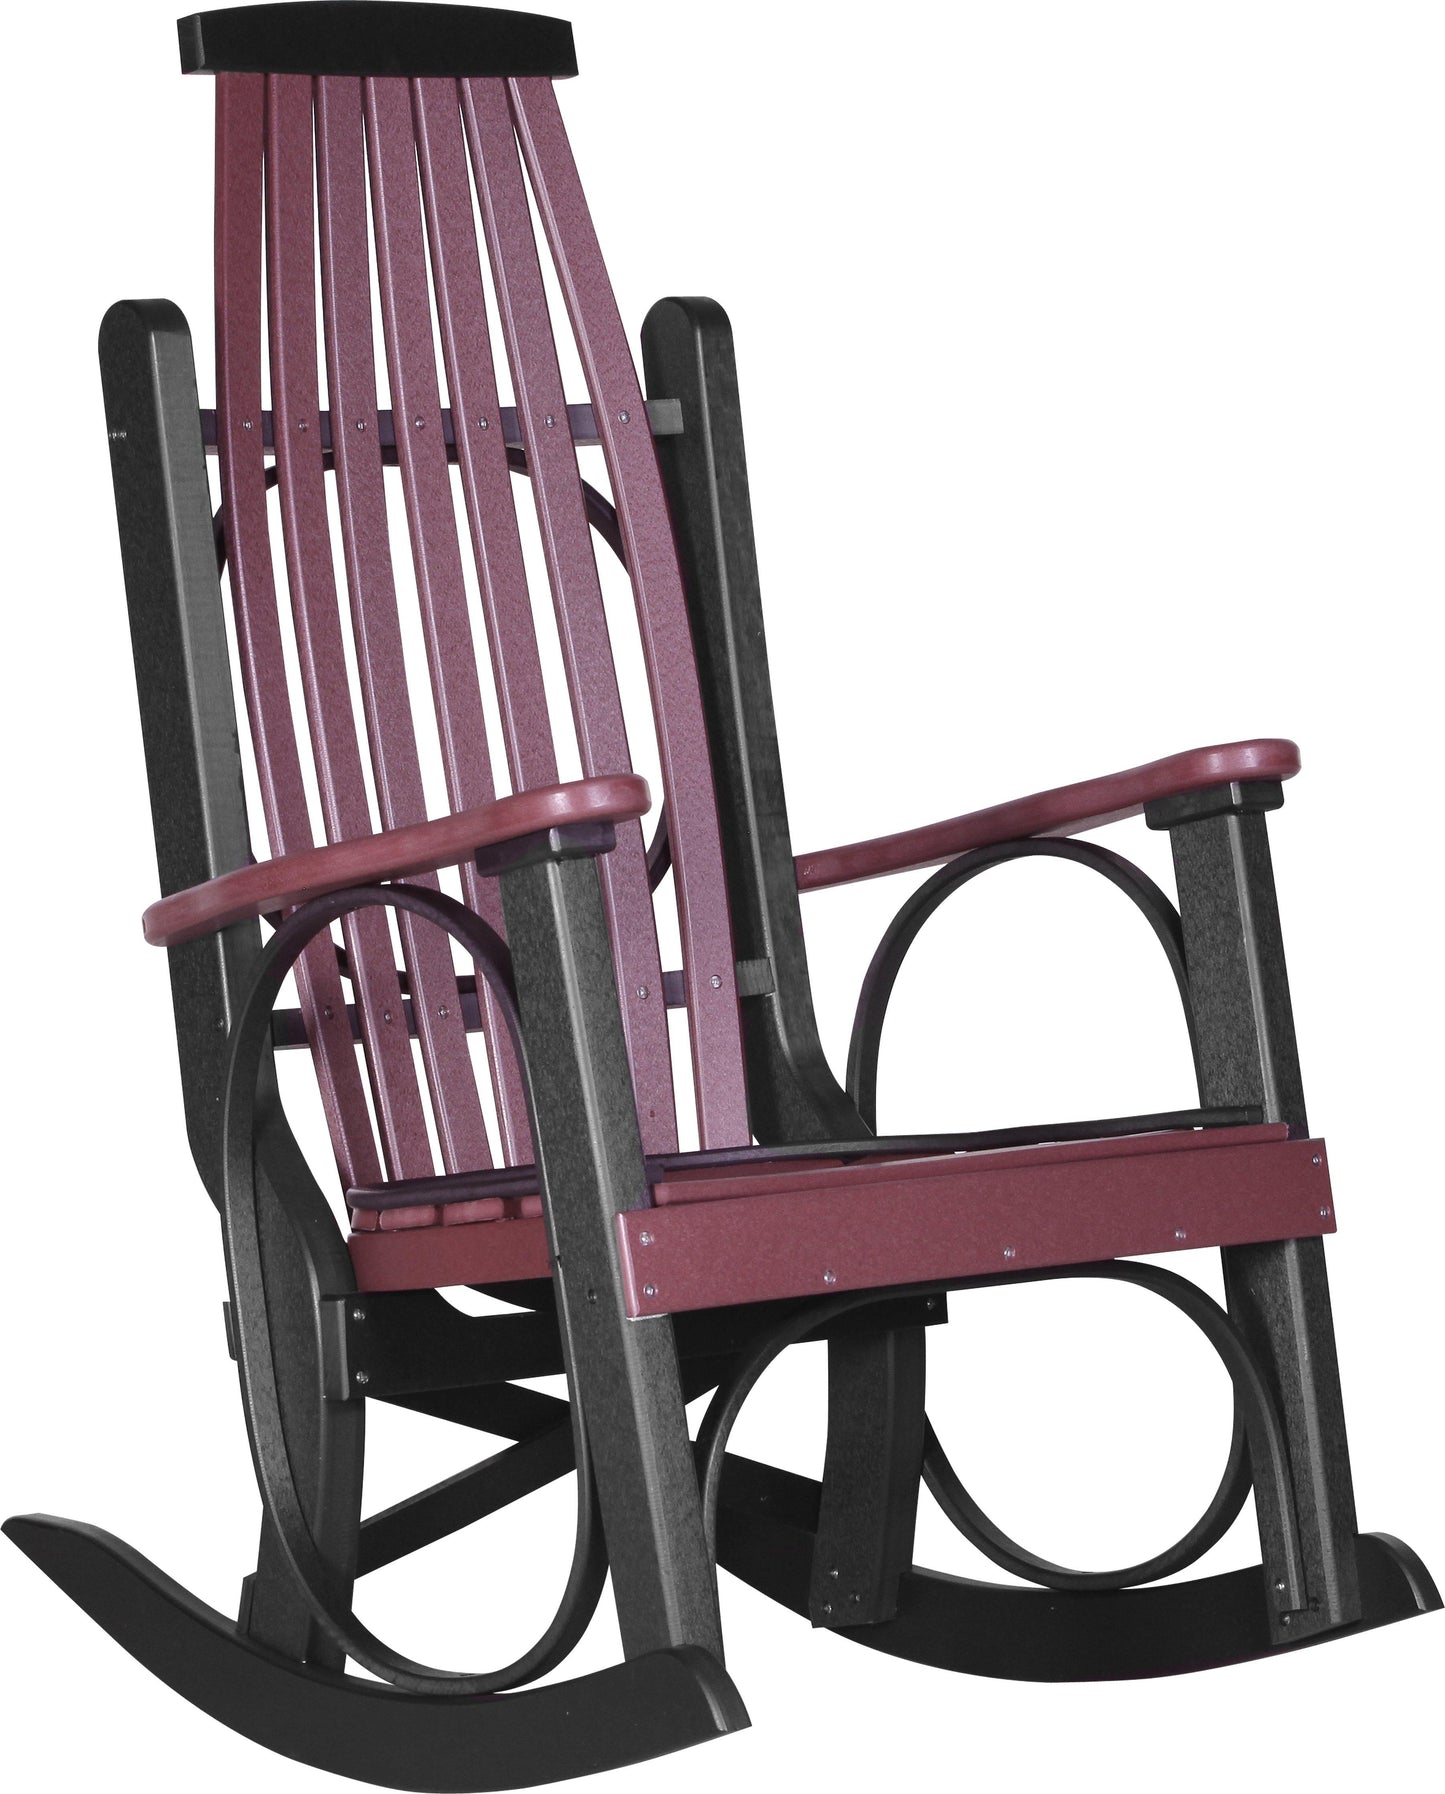 LuxCraft Recycled Plastic Grandpa's Porch Rocking Chair - LEAD TIME TO SHIP 3 TO 4 WEEKS